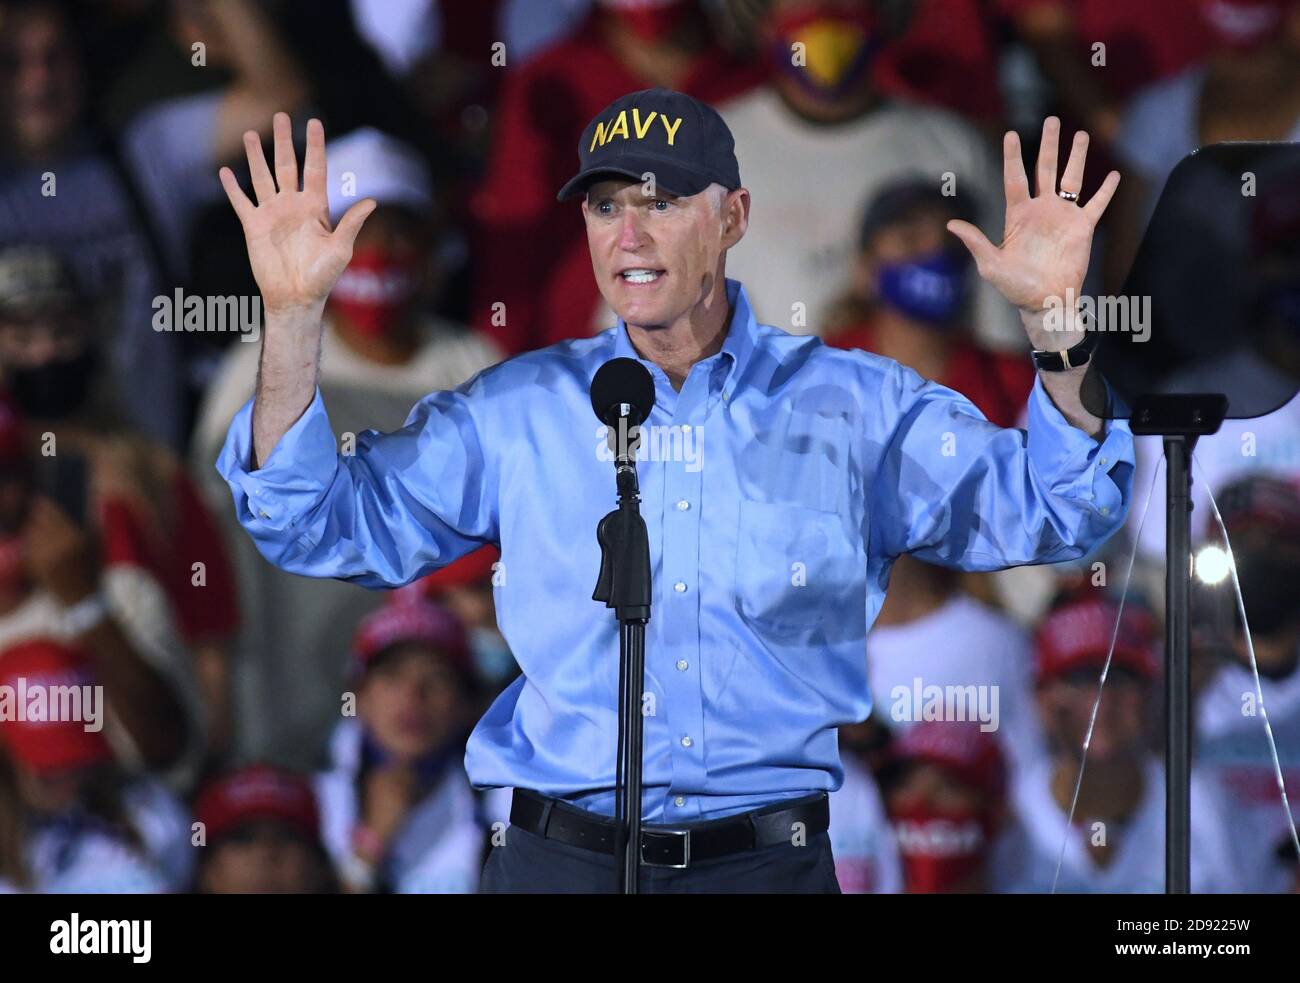 Opa Locka, United States. 01st Nov, 2020. November 1, 2020 - Opa-Locka, Florida, United States - U.S. Senator Rick Scott (R-FL) speaks to the crowd before the arrival of U.S. President Donald Trump at a campaign rally at Miami-Opa Locka Executive Airport on November 1, 2020 in Opa-Locka, Florida. President Trump held events in five states today, as he continues his campaign against Democratic presidential nominee Joe Biden two days before the November 3 election. Credit: Paul Hennessy/Alamy Live News Stock Photo